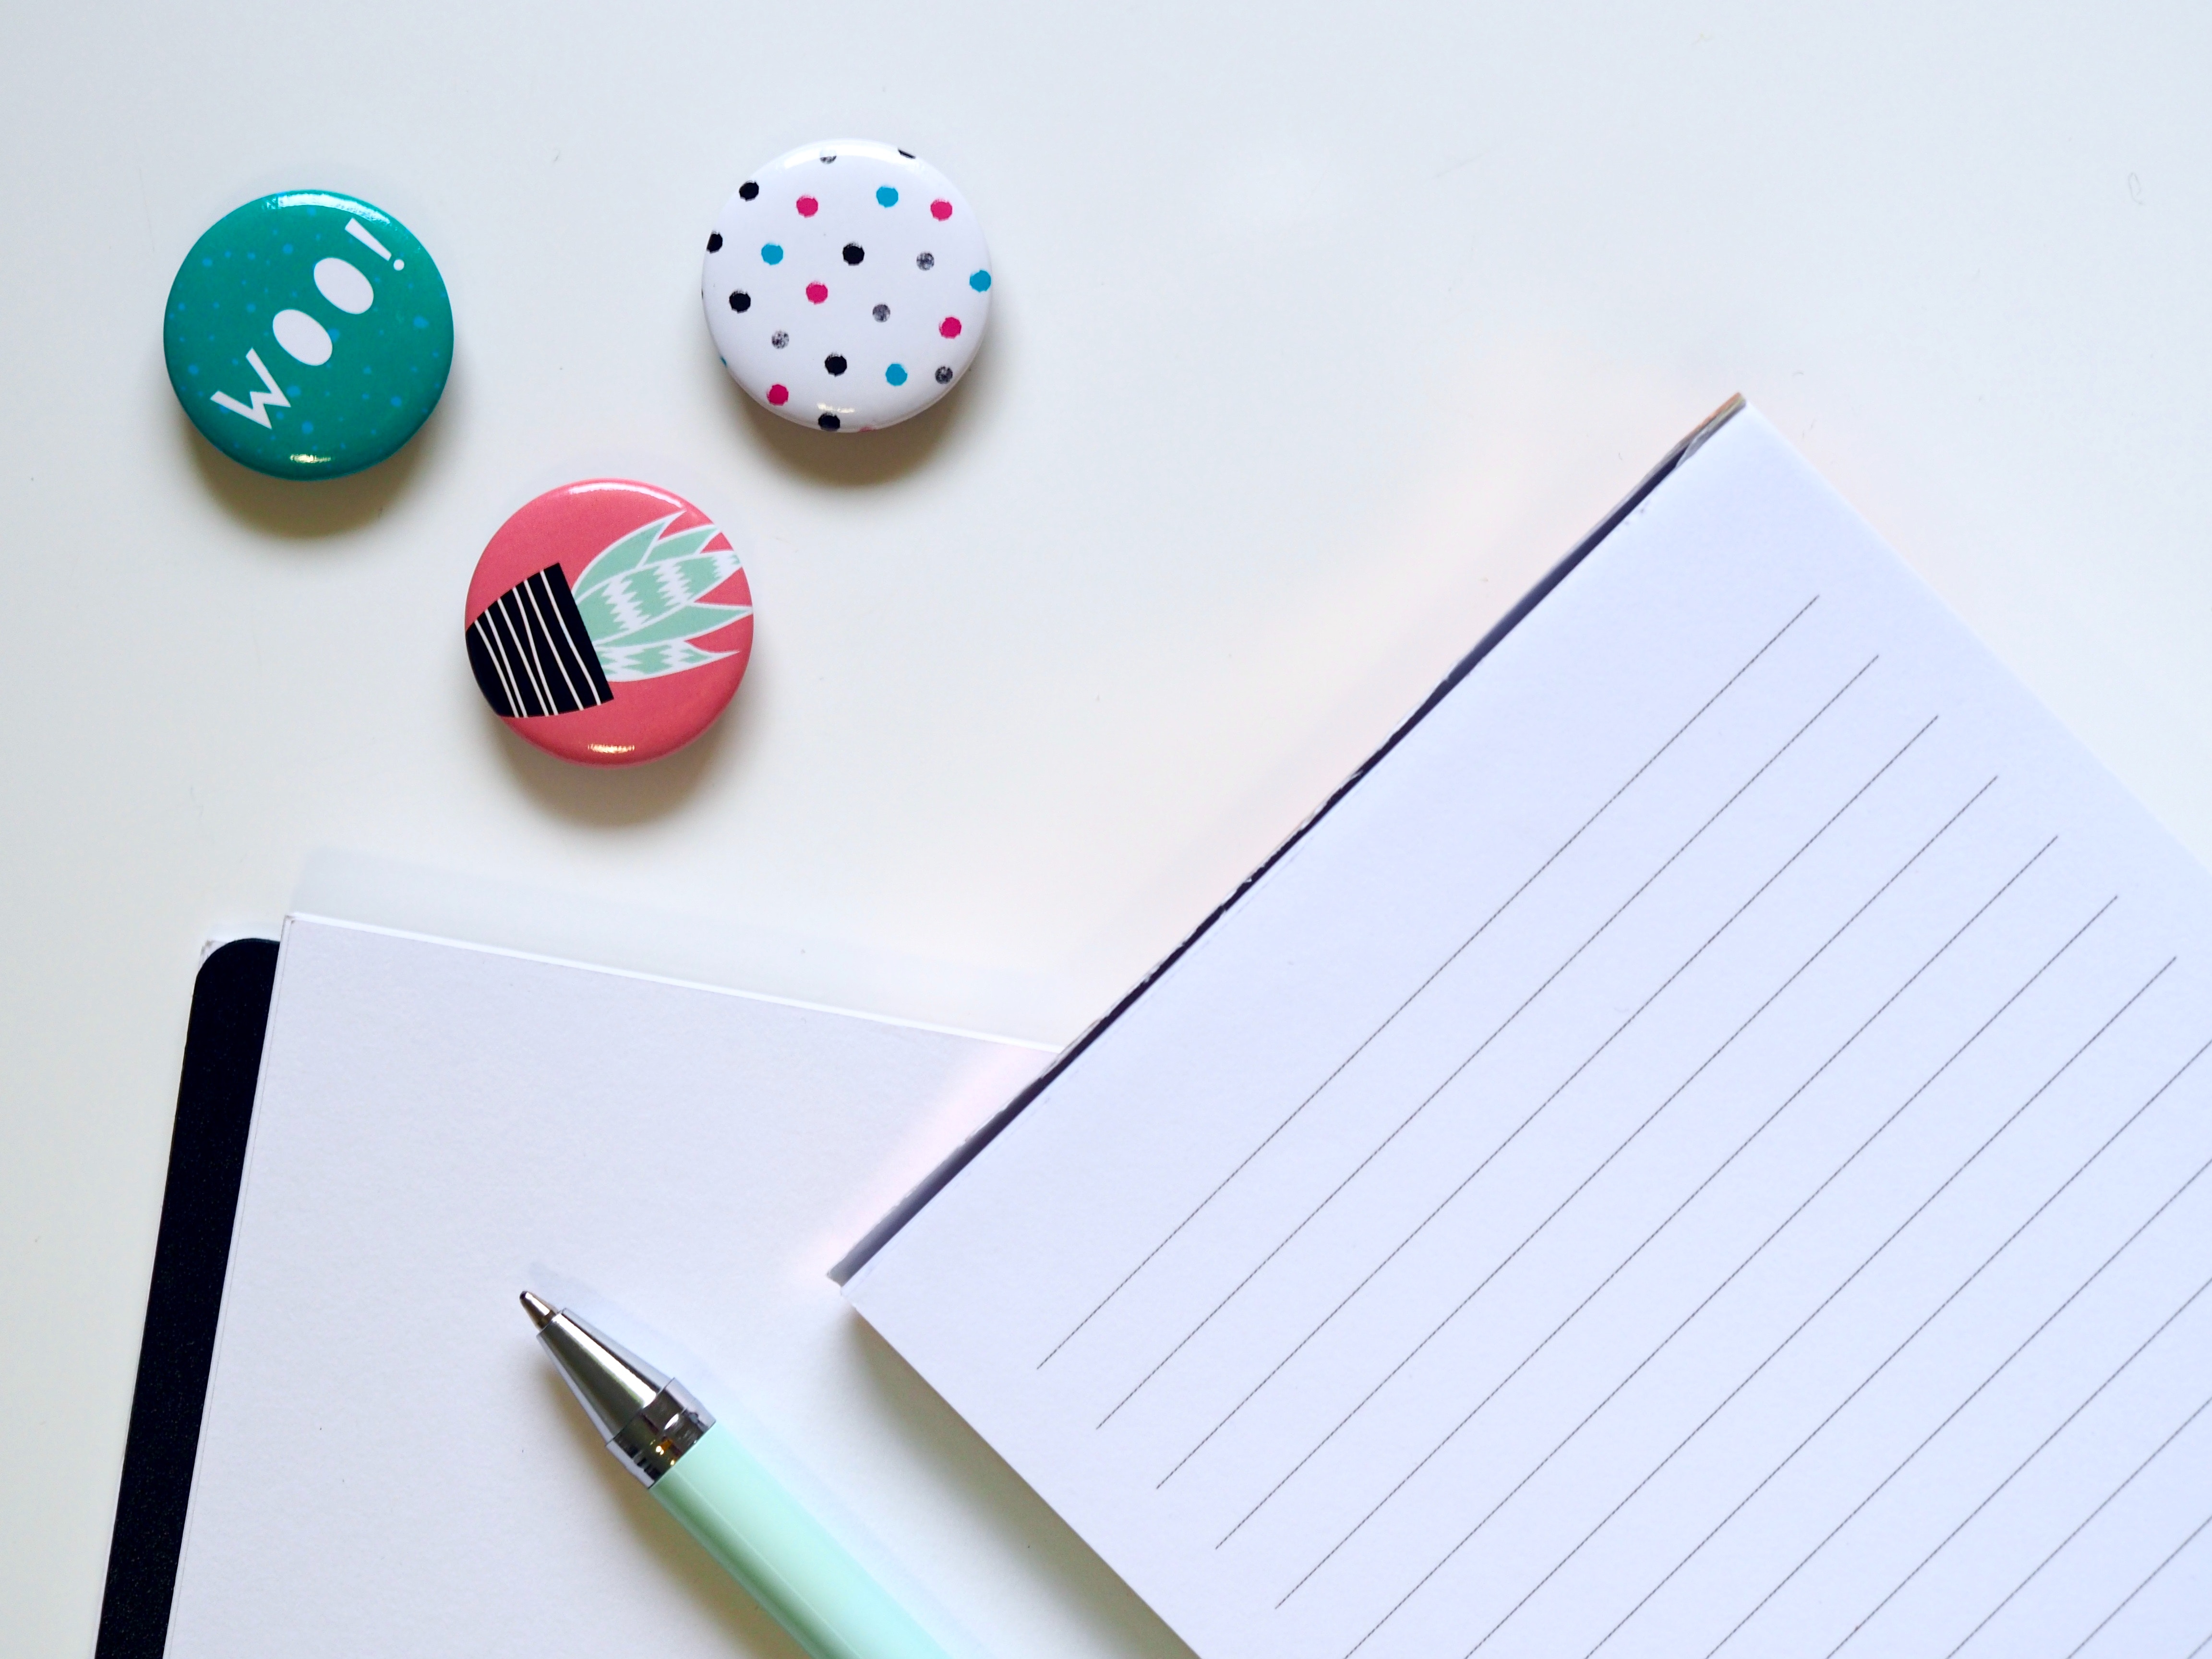 Header image for the article displaying a notebook, pen and cute pins.